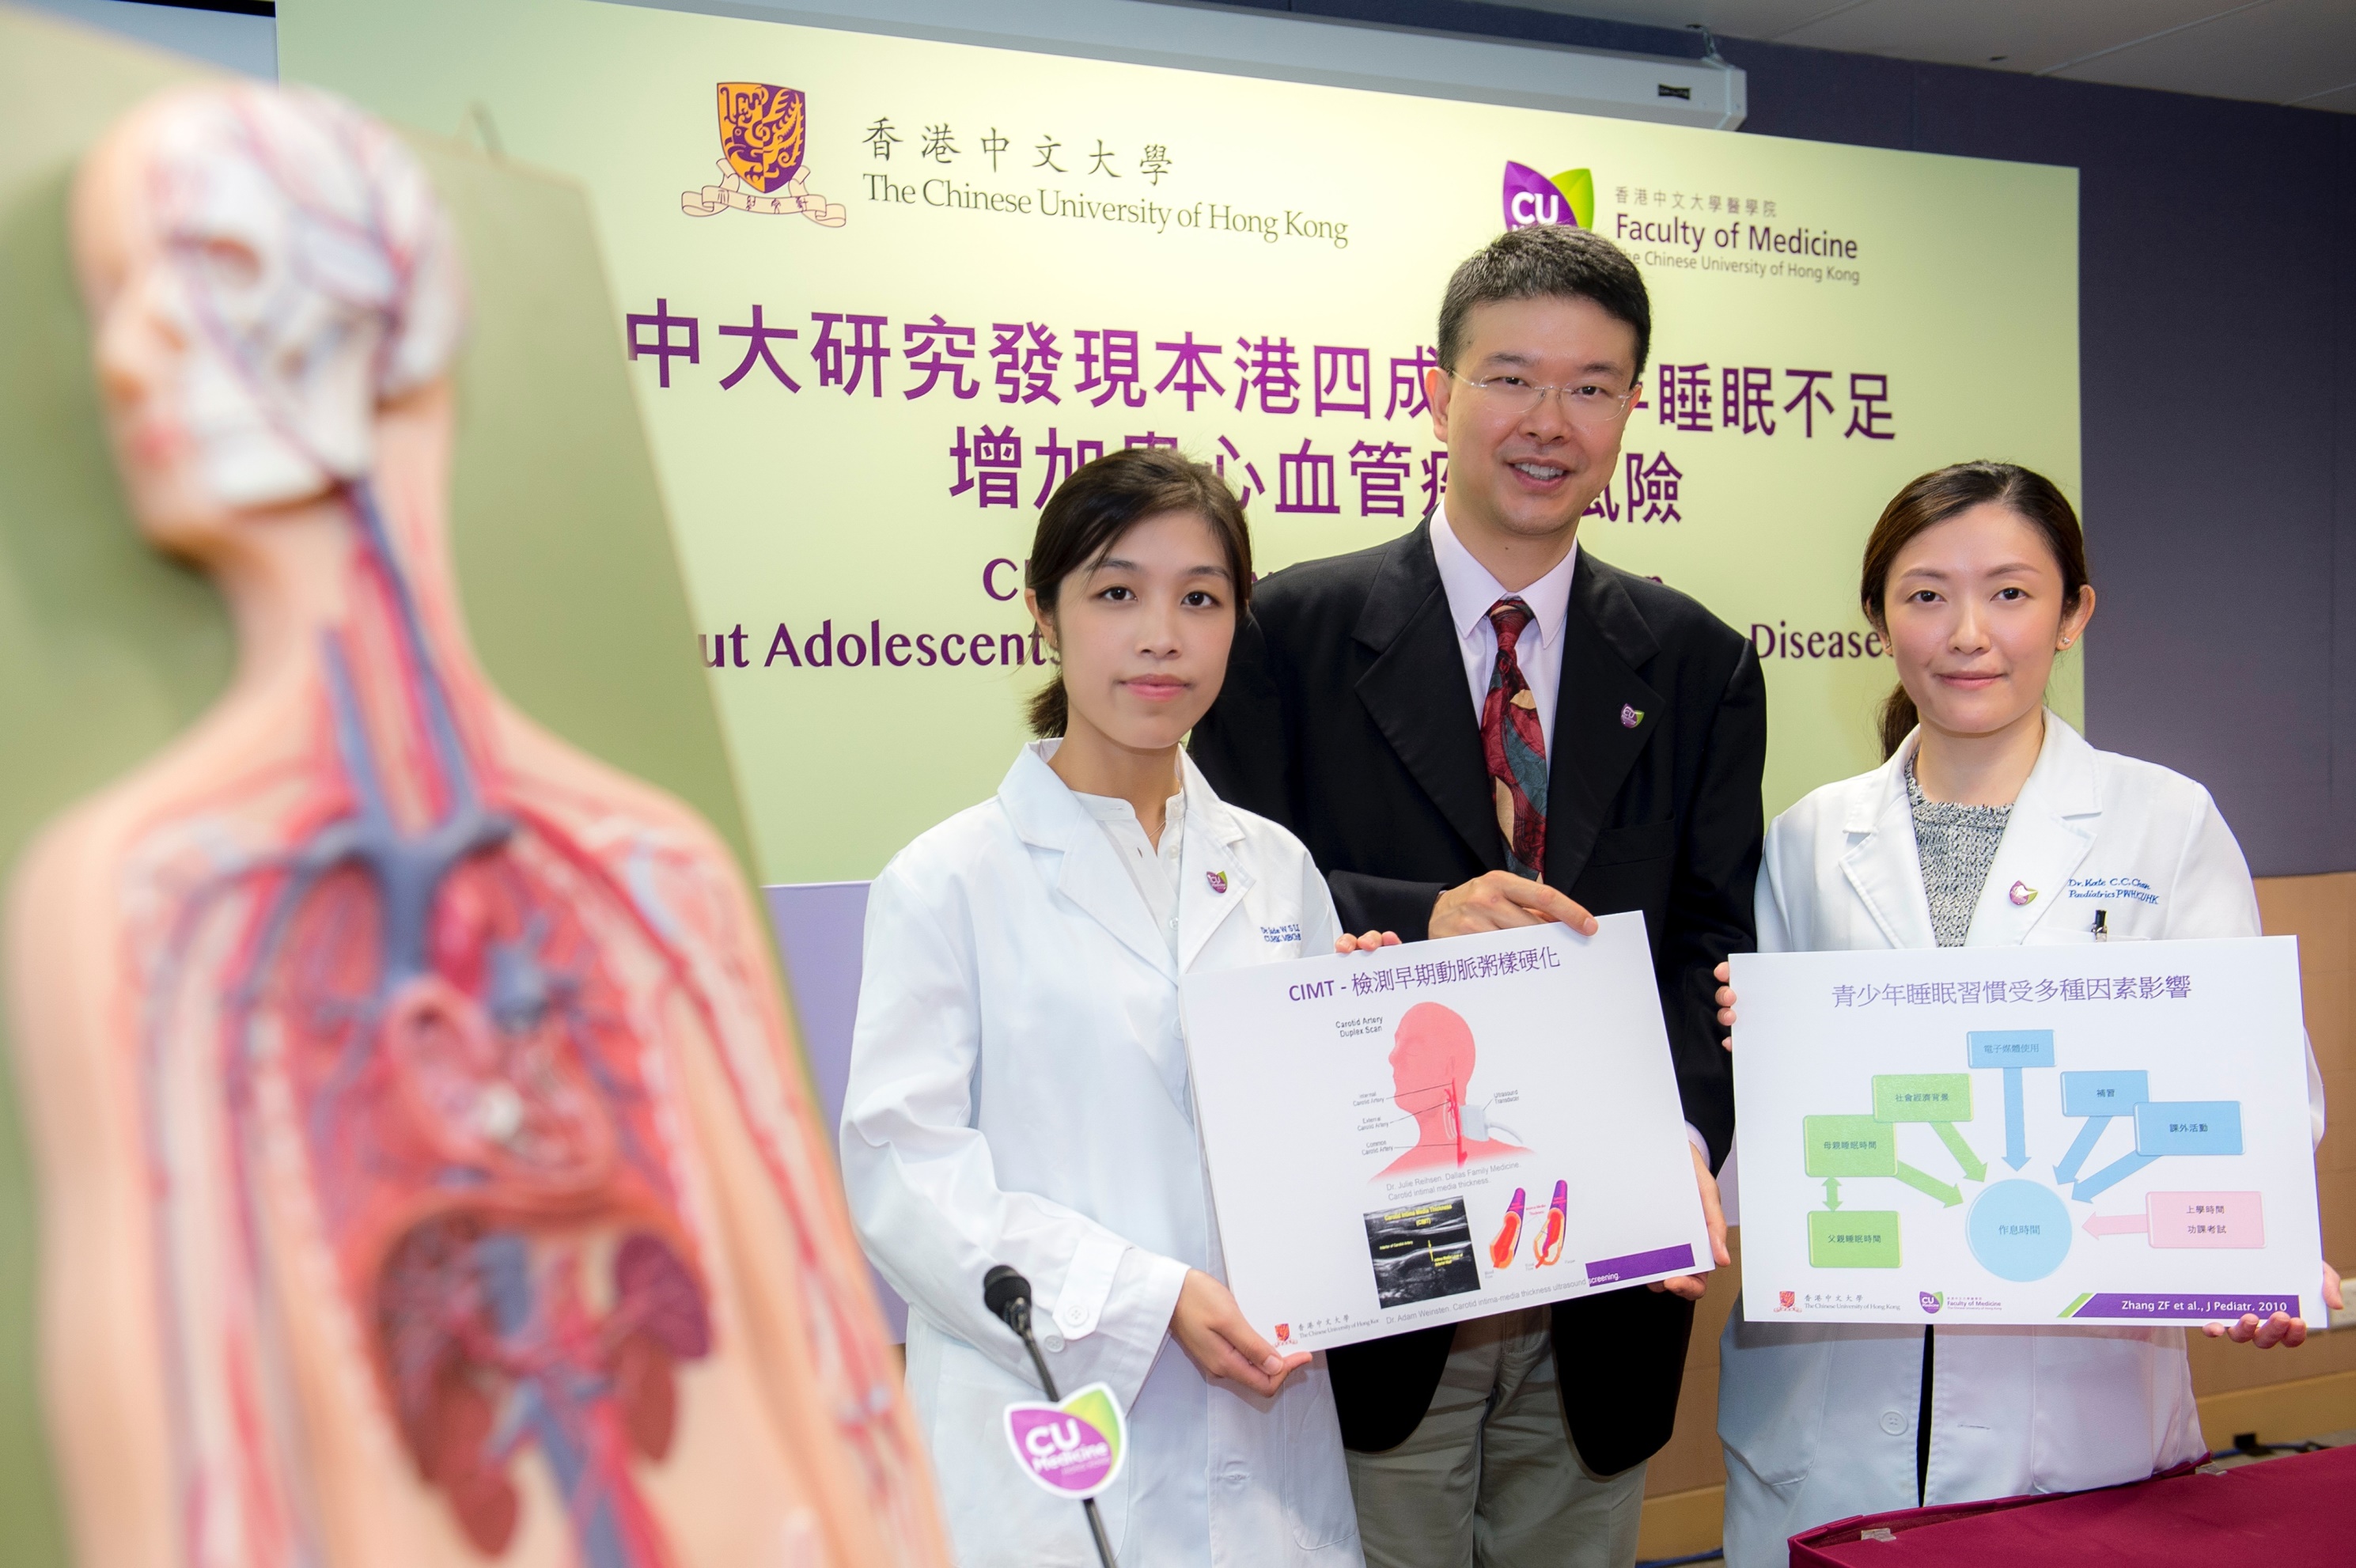 Researchers of the Faculty of Medicine at CUHK have recently conducted a study which revealed that shorter sleep duration puts adolescents at risk of cardiovascular diseases. (From left) Dr. Jade LI, fresh medical graduate of CUHK; Professor Albert LI and Dr. Kate CHAN, both from the Department of Paediatrics of the Faculty of Medicine at CUHK.